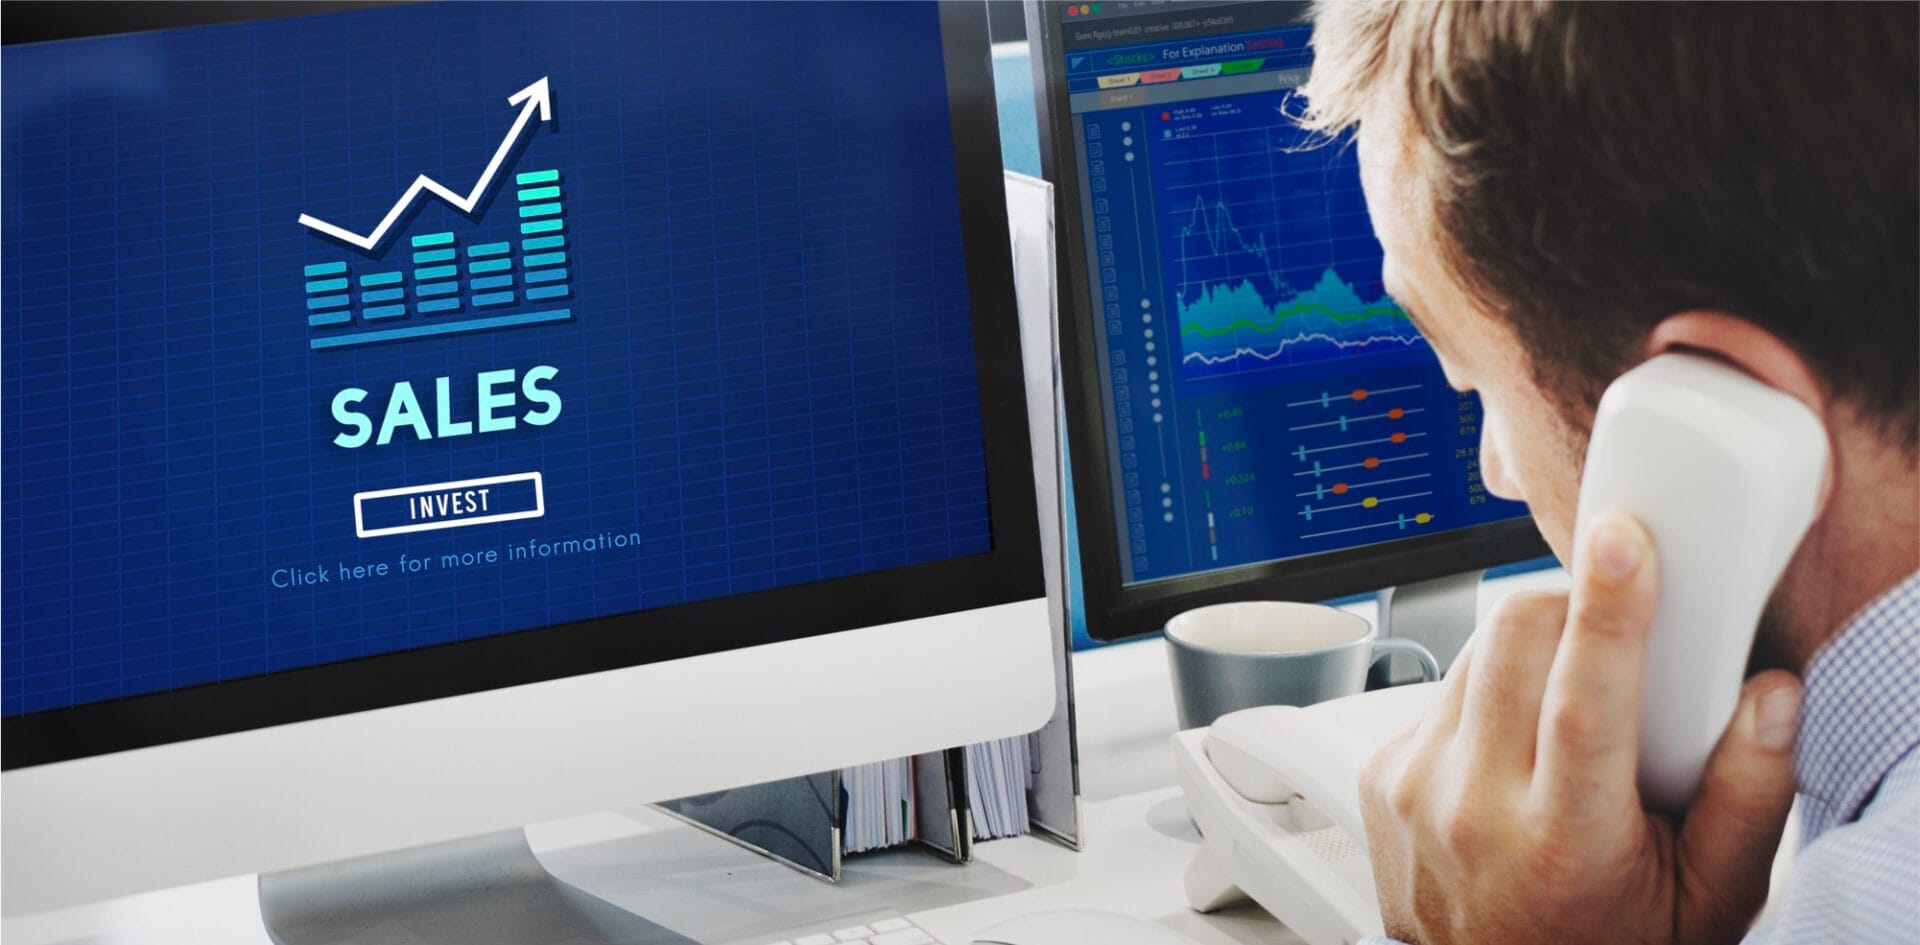 The image depicts a businessman analyzing financial data on two computer screens. One screen displays a sales graph emphasizing growth, while the other shows complex stock market trends, reflecting a professional setting focused on financial investments and market analysis.